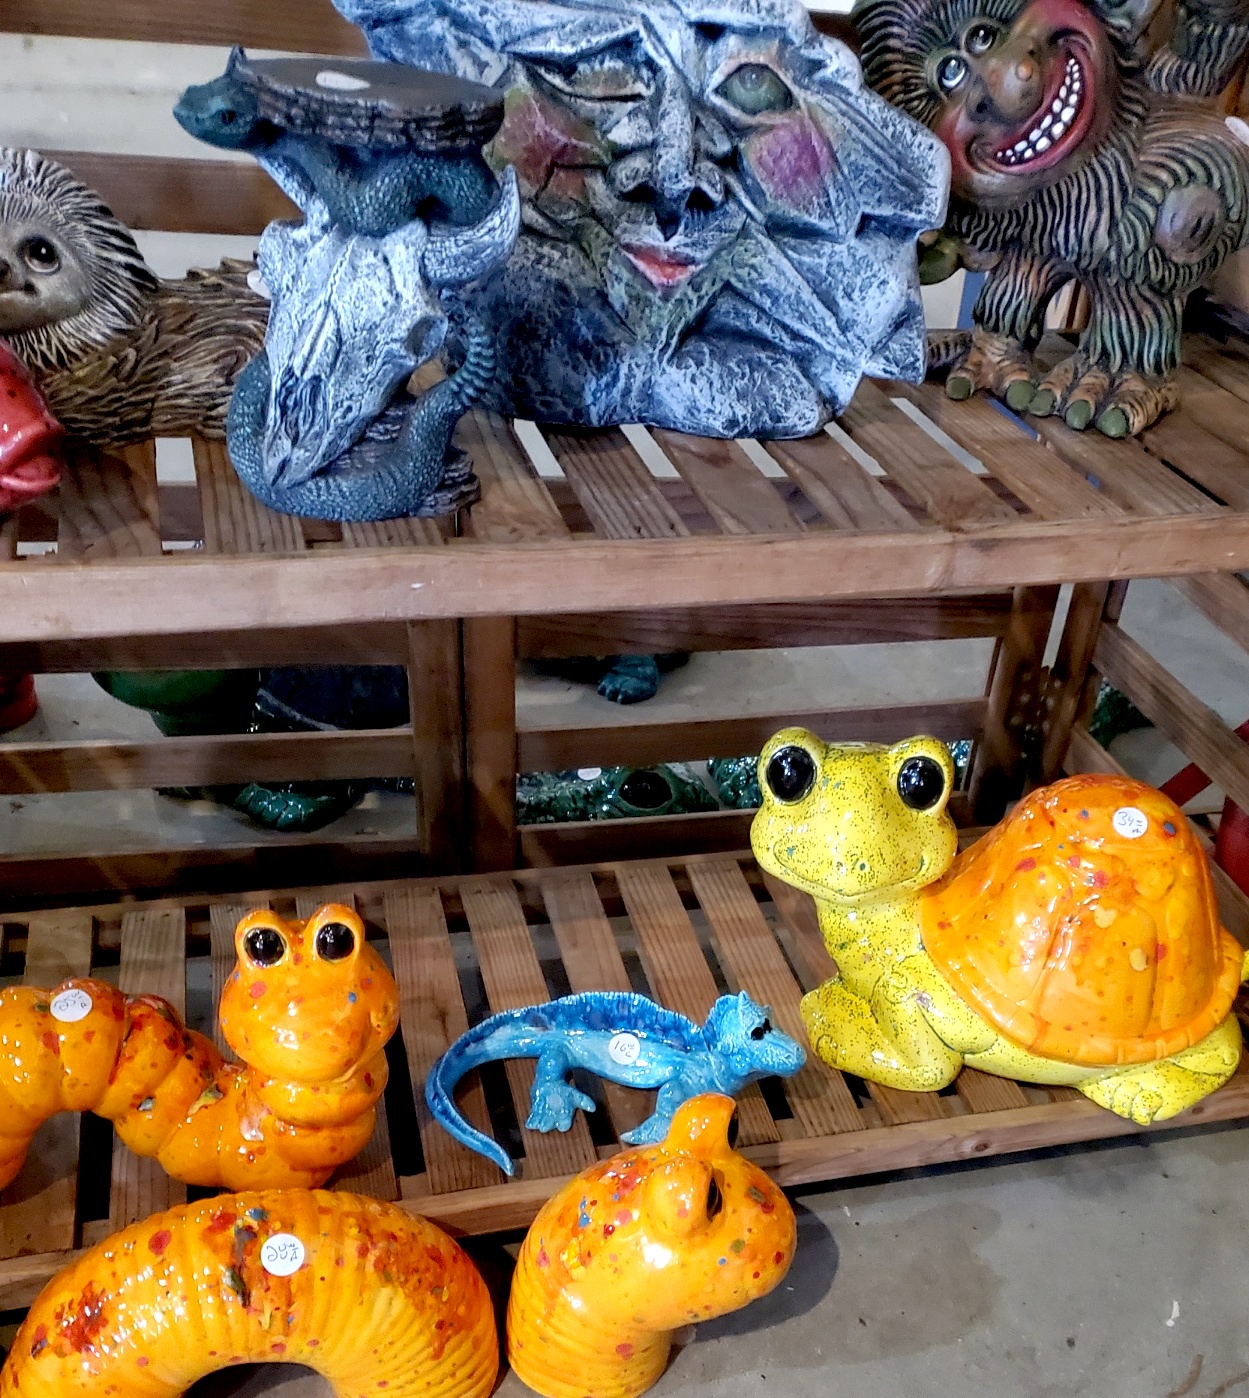 Brightly colored ceramic creatures. A yellow and orange turtle, aqua lizard, purple tree trunk, and dancing troll adorn April Evans booth at The Greater Rochester Heritage Days Festival.